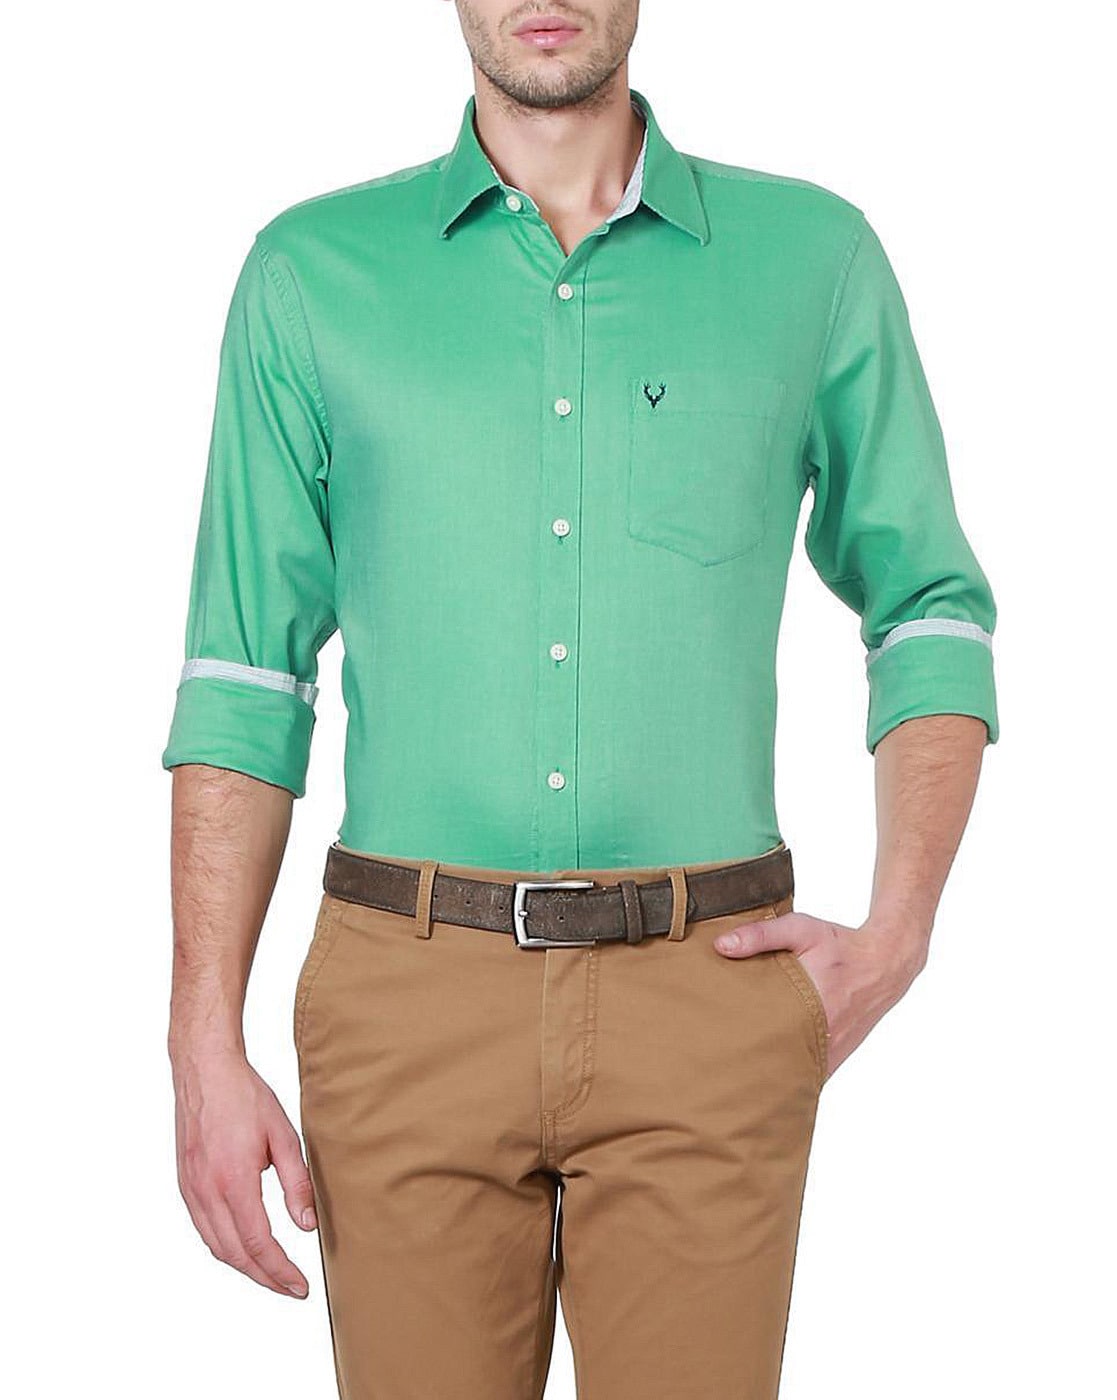 Green shirt with brown trousers and a belt, accessorized with shades_ ⋆  Best Fashion Blog For Men - TheUnstitchd.com